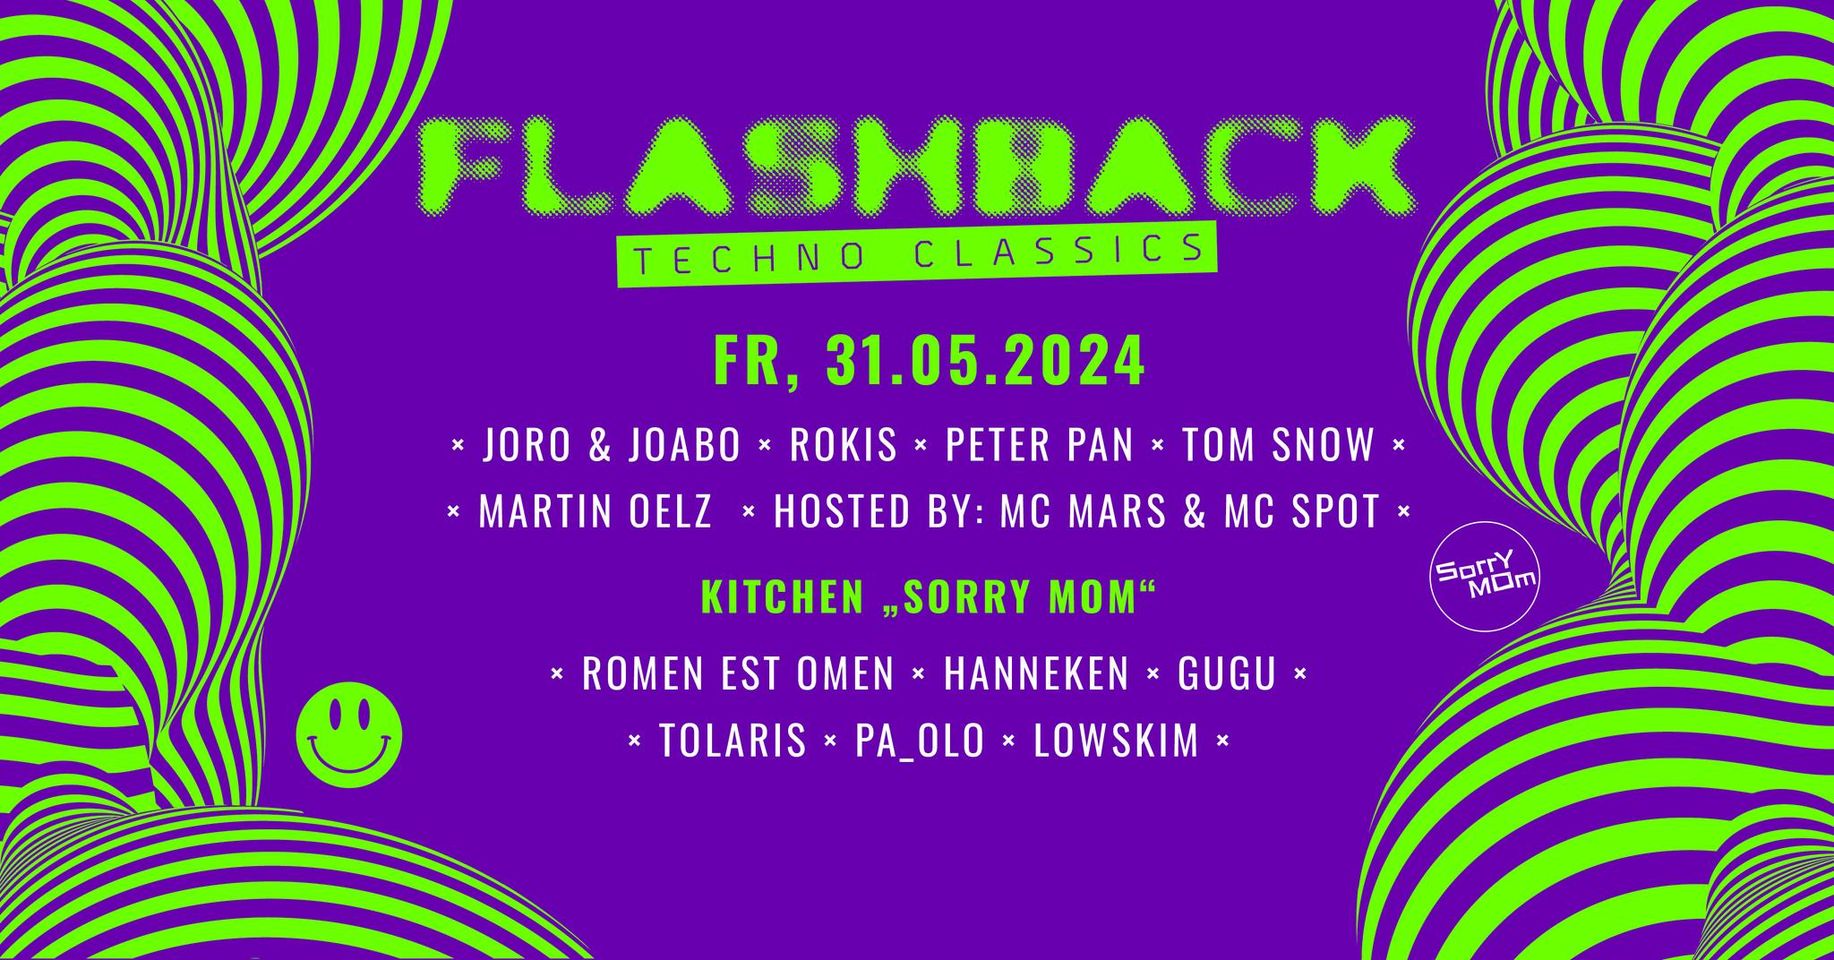 FLASHBACK Techno Classics am 31. May 2024 @ Grelle Forelle.